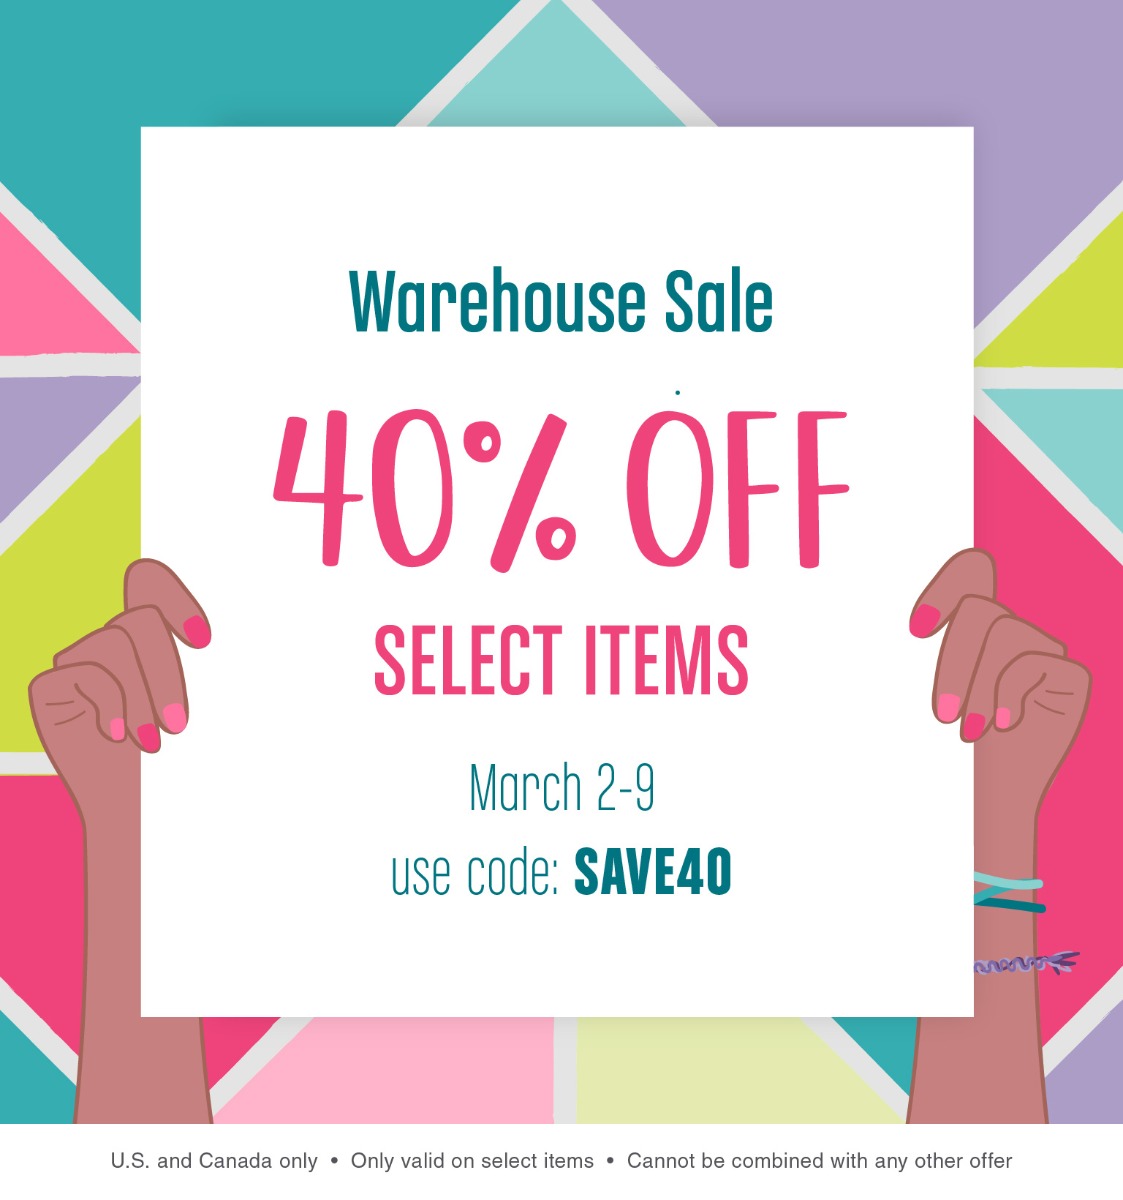 It's our semiannual warehouse sale! Save 40% on select Tombow items March 2nd through 9th with code SAVE40 at checkout. Cannot be combined with any other offer. United States and Canada only.